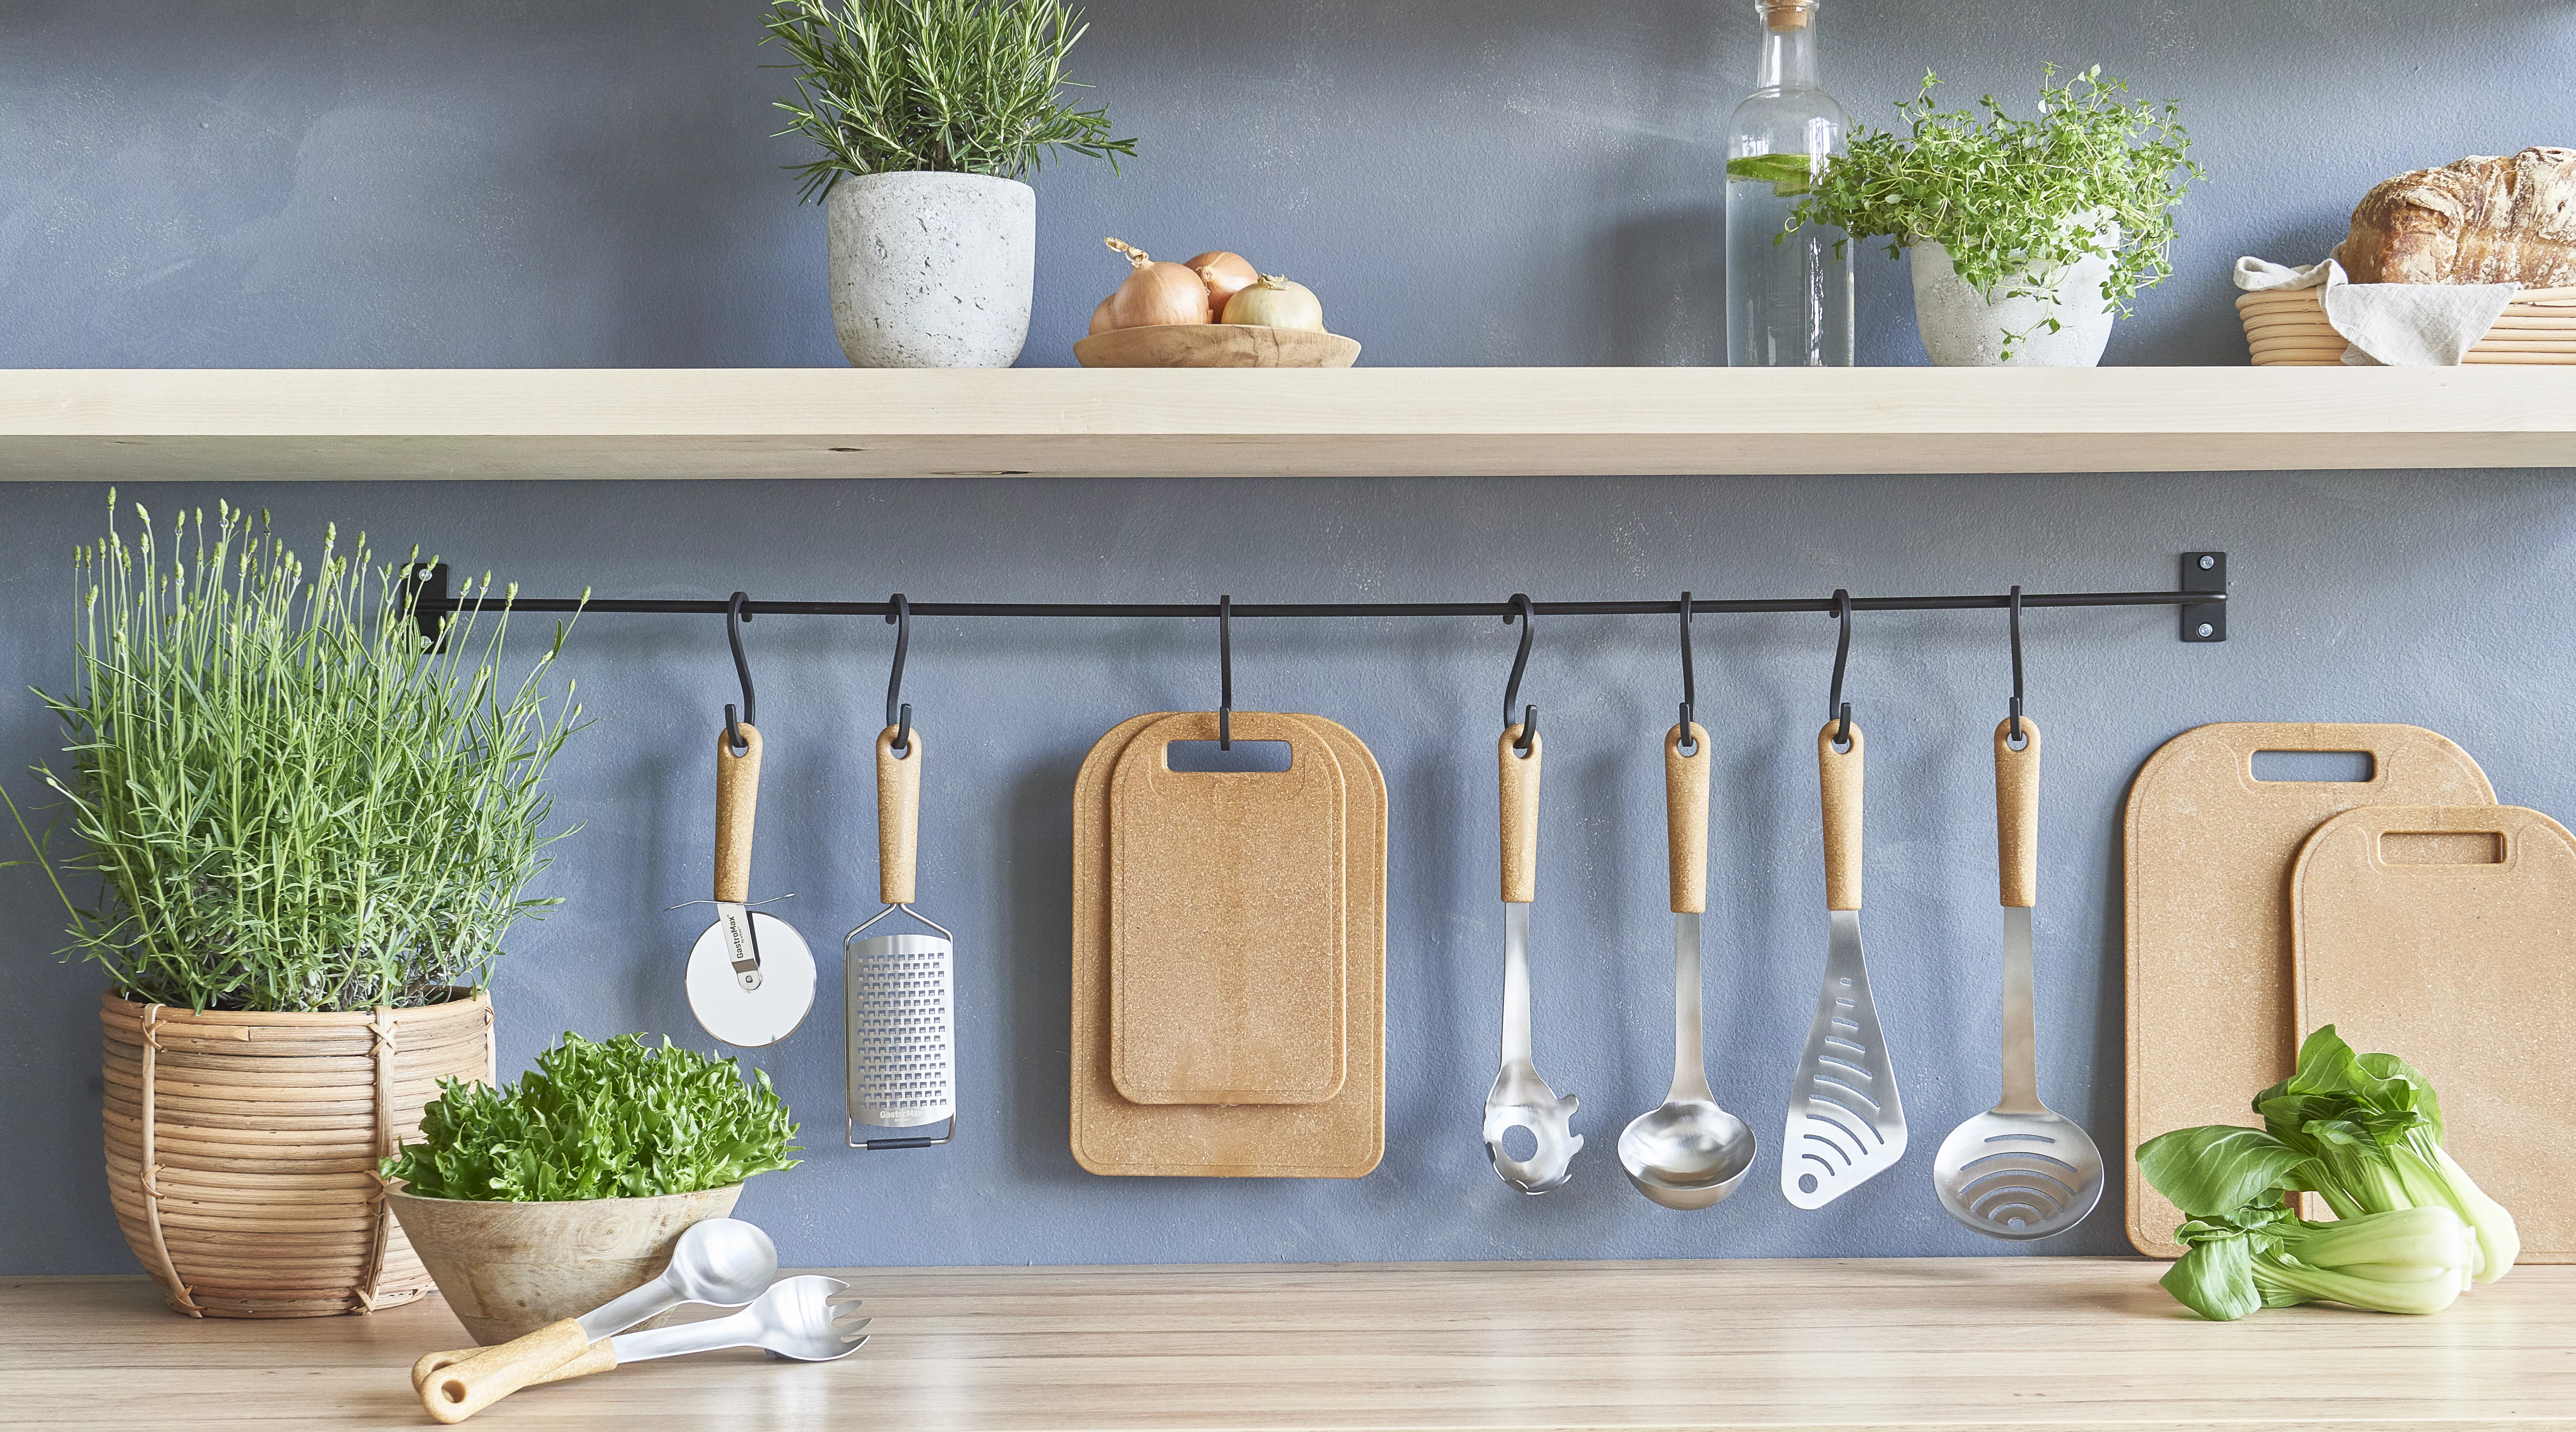 GastroMax™ kitchen utensils and cutting boards made from bioplastic